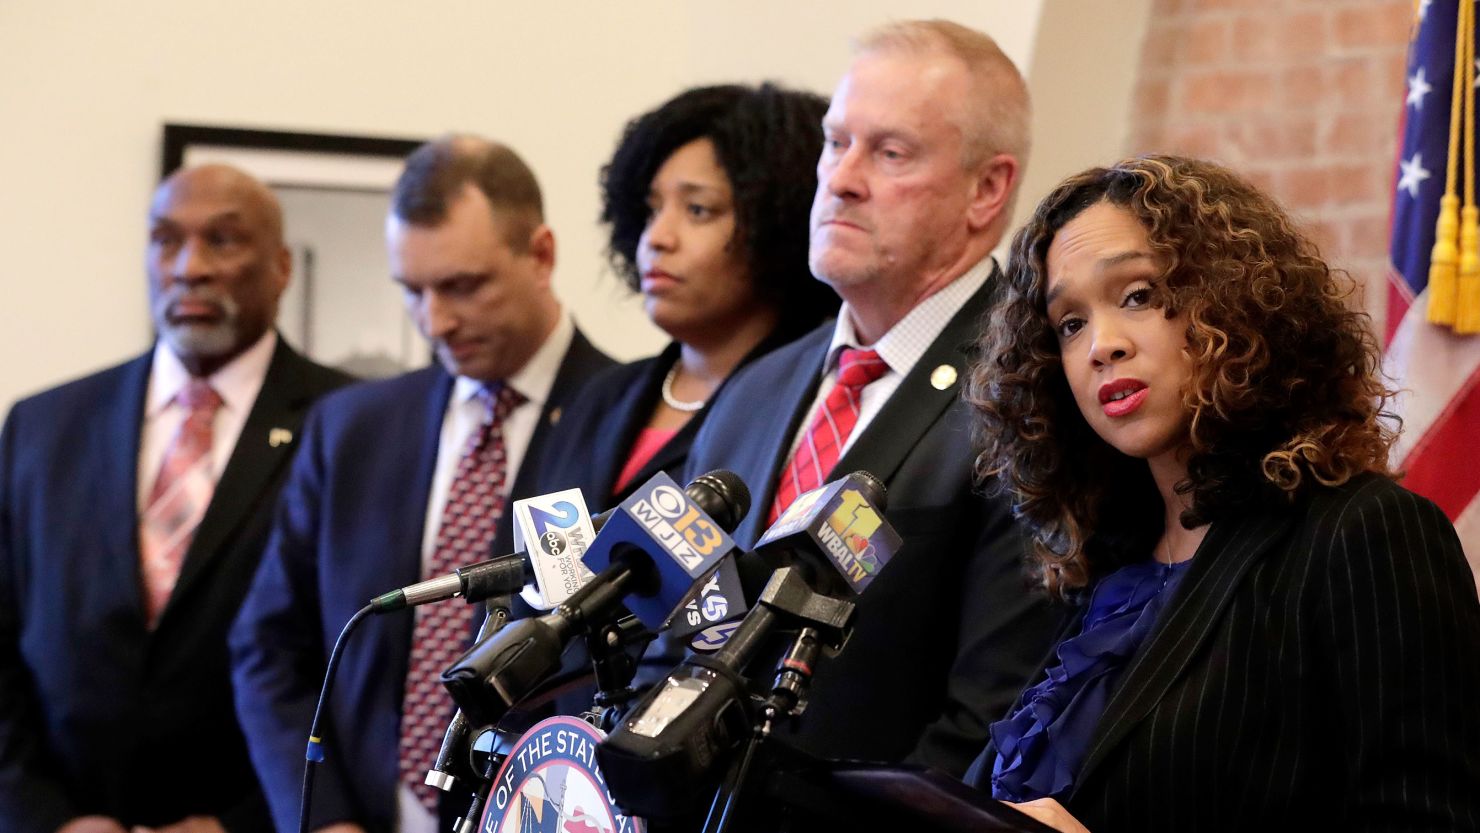 Baltimore City State's Attorney Marilyn Mosby, right, speaks during a news conference announcing the indictment of 25 corrections officers.